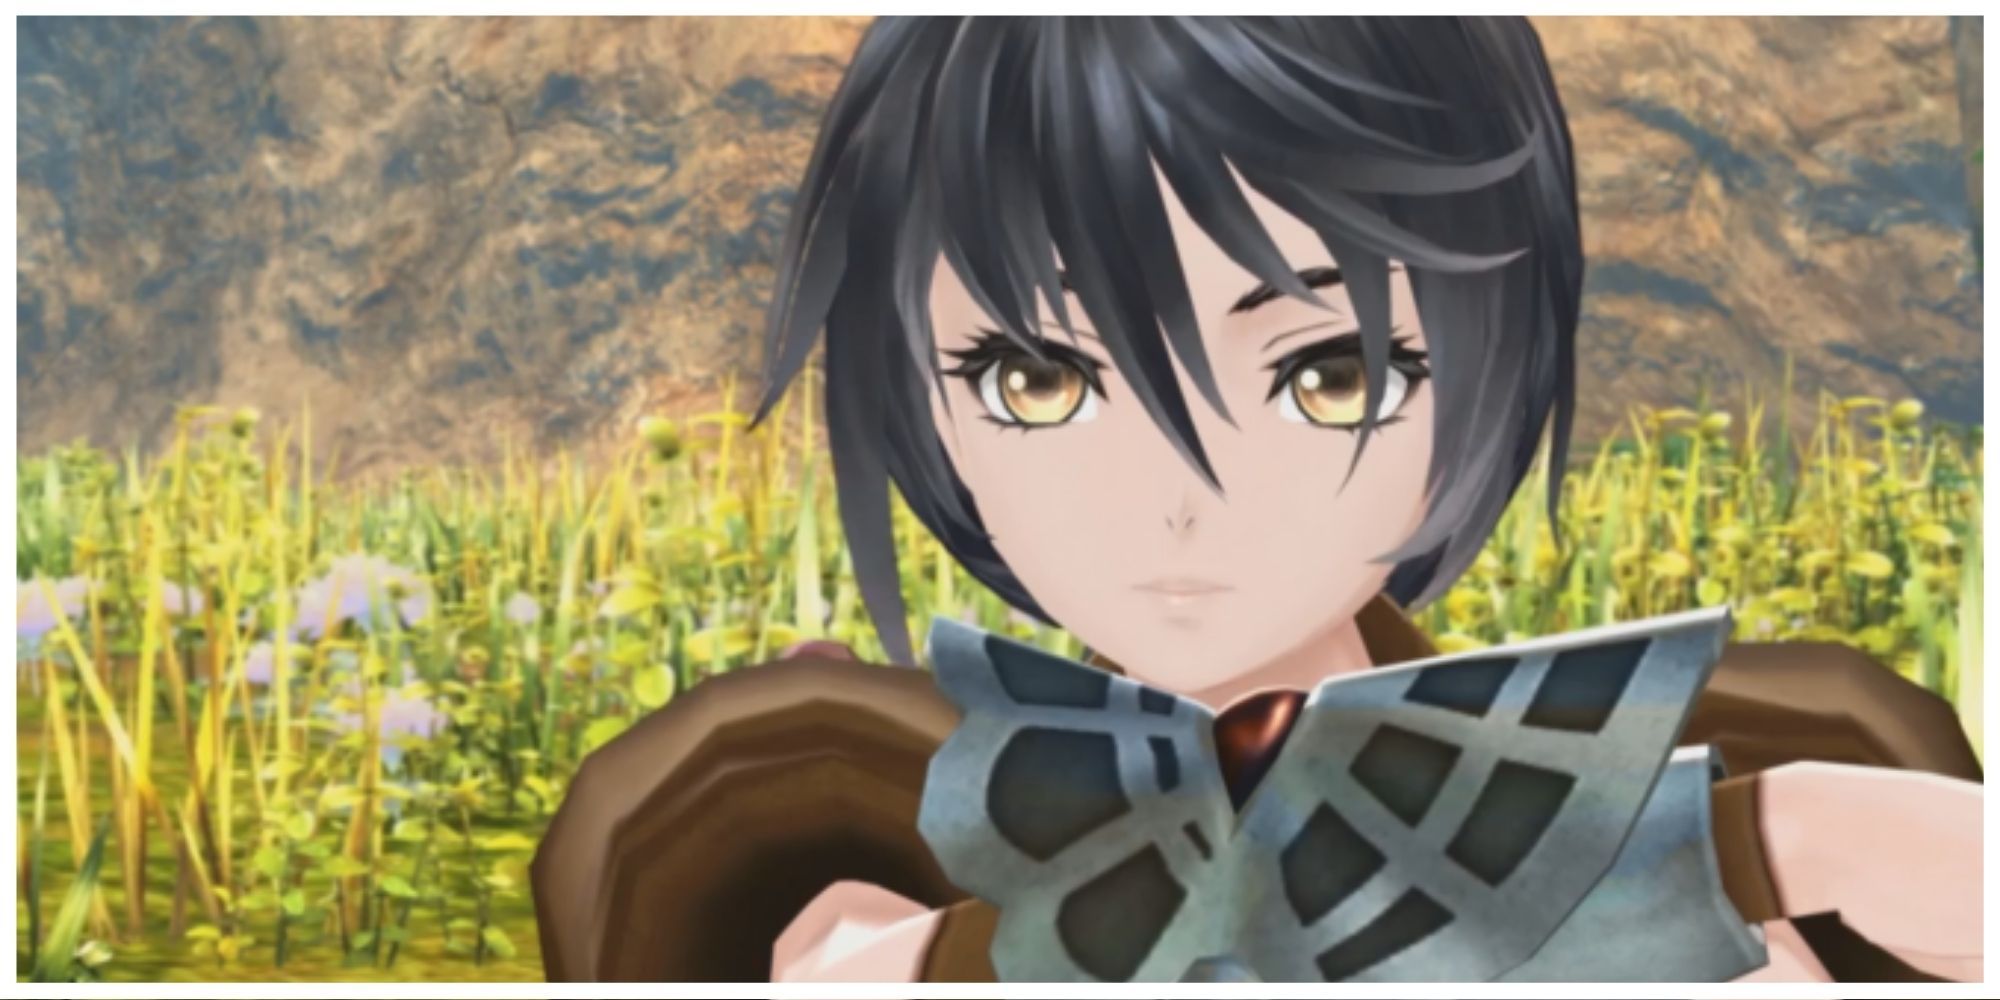 Velvet from Tales of Berseria at the beginning of the game